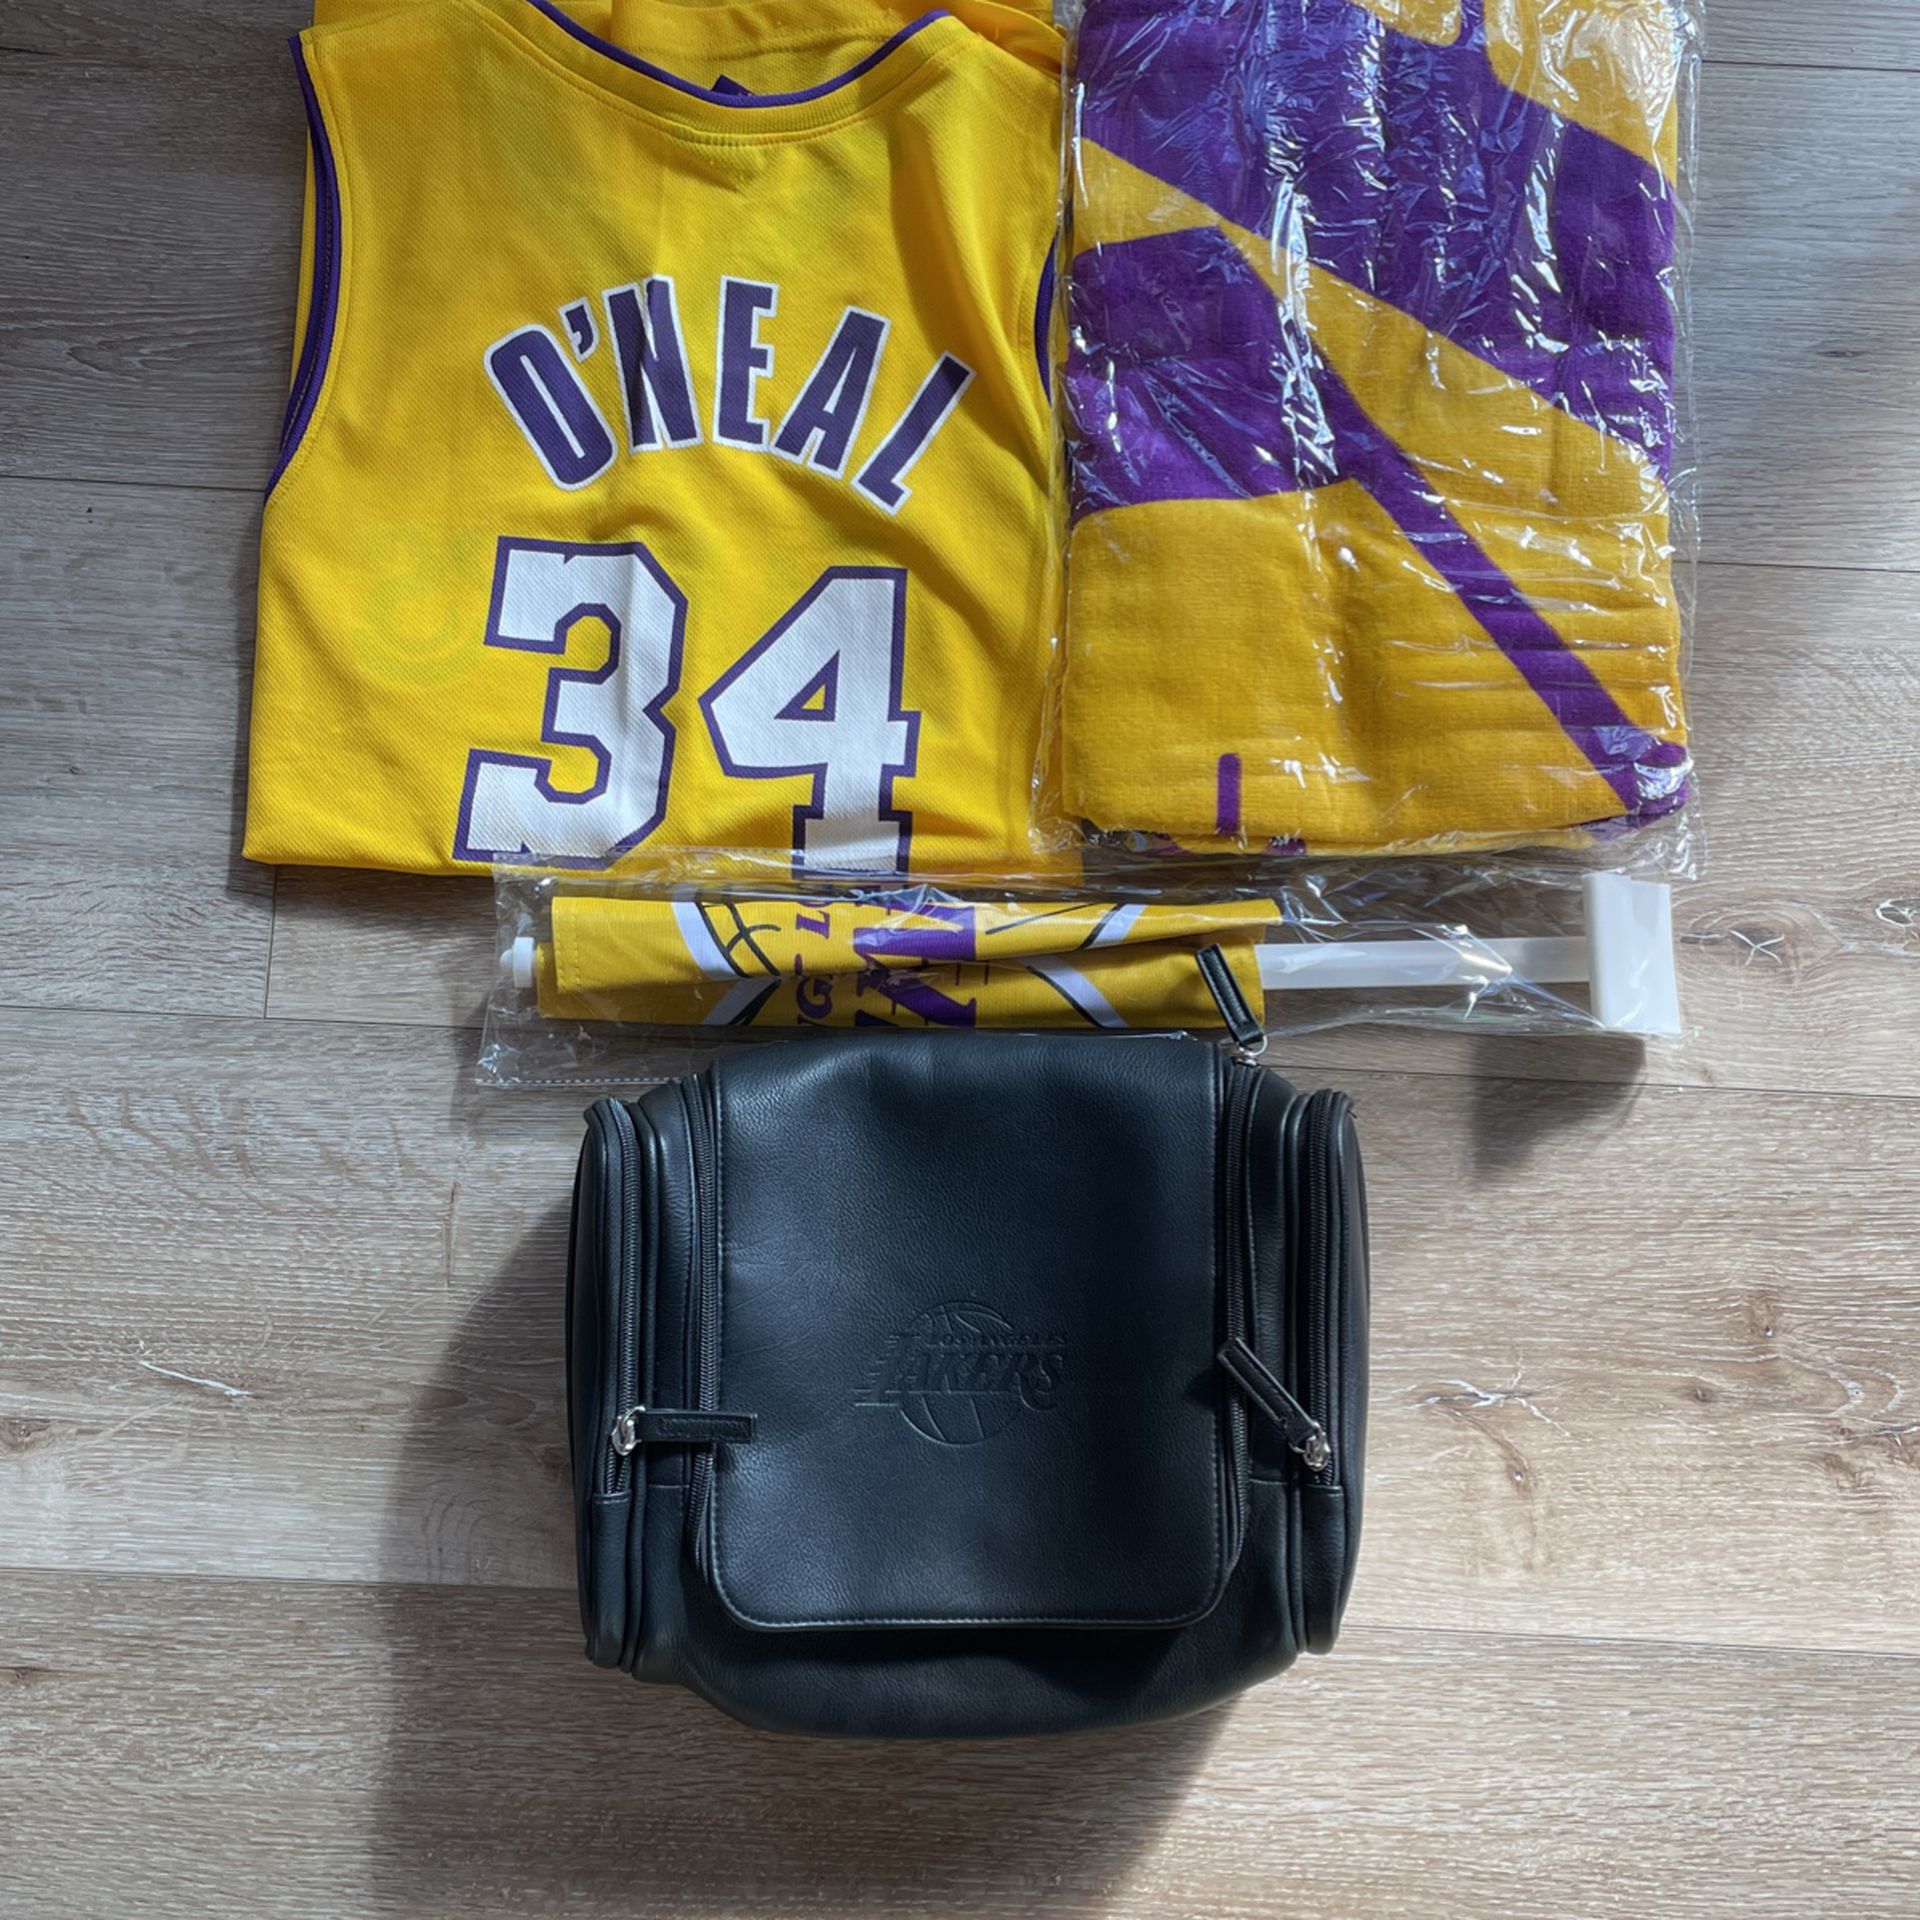 lakers items for sale